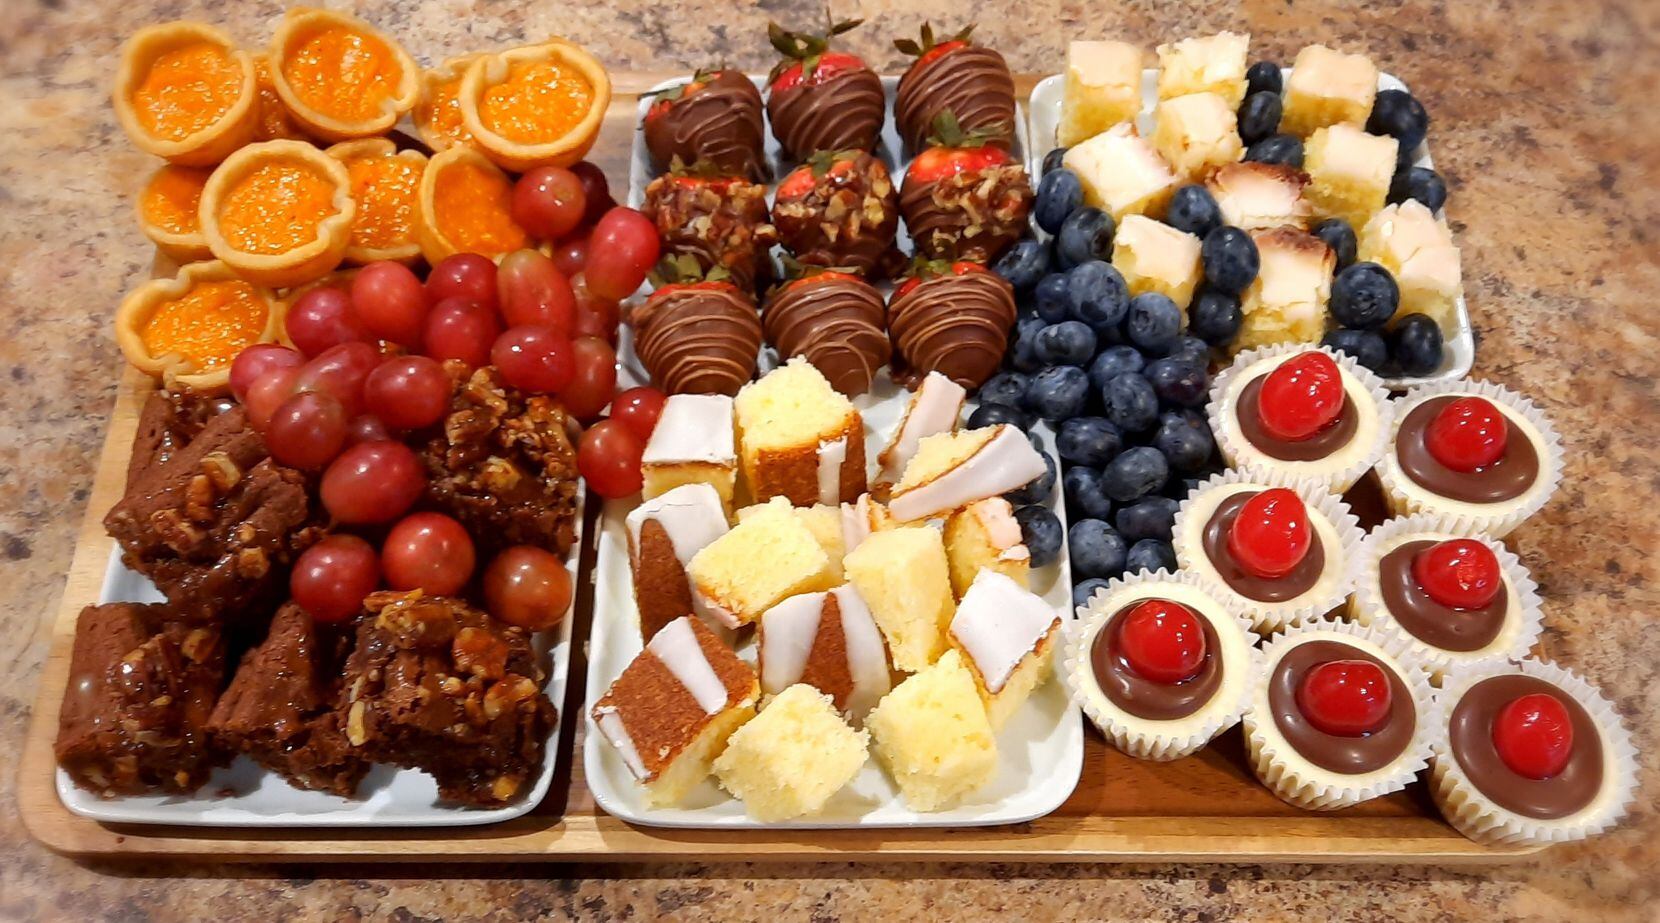 A dessert charcuterie board from 2 Sisters Sweet Creations. Sisters Yolanda Beldsoe and...